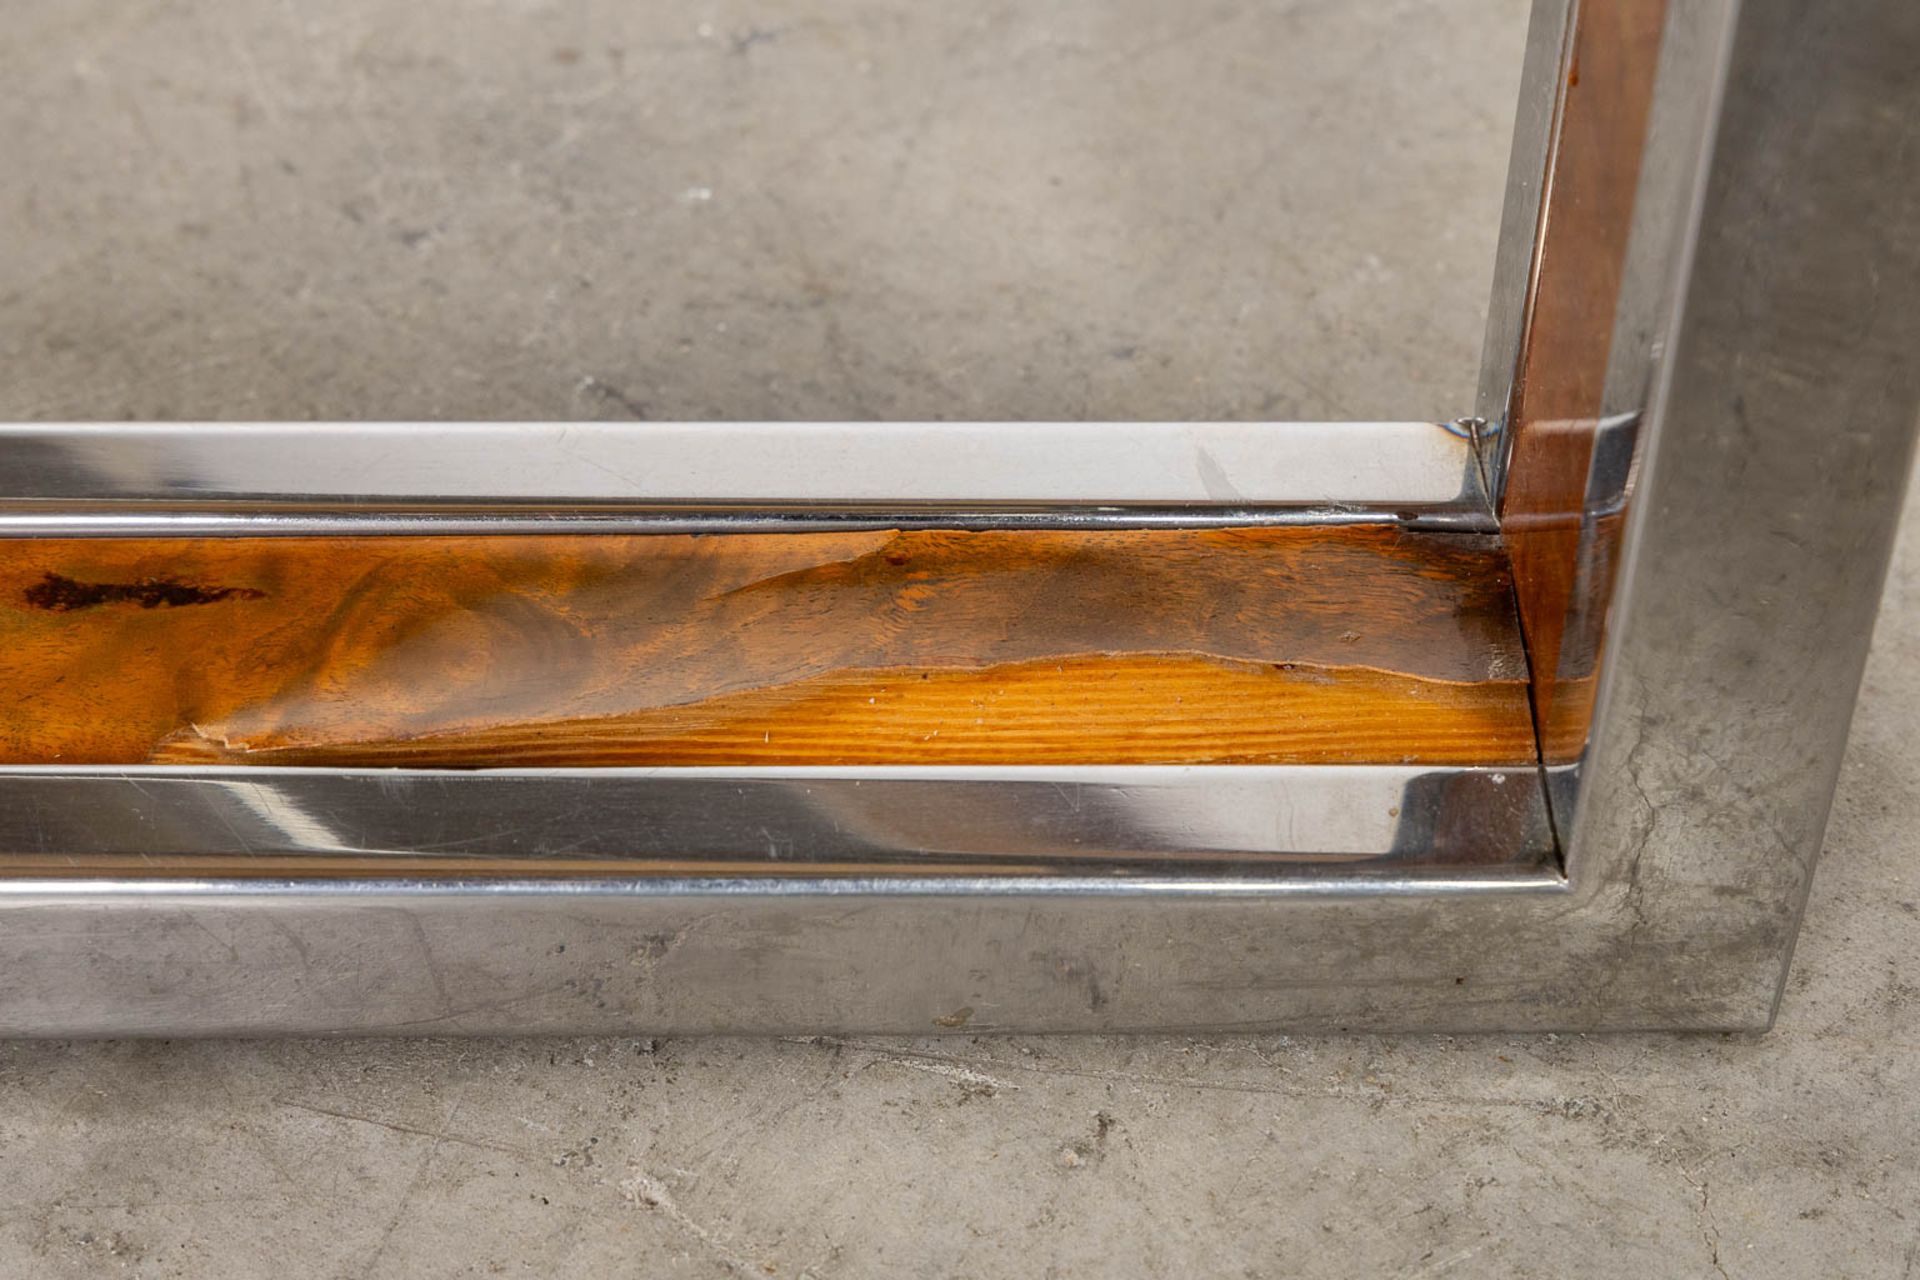 A coffee table, chrome with a faux wood inlay and a glass top. (L:80 x W:120 x H:40 cm) - Image 10 of 10